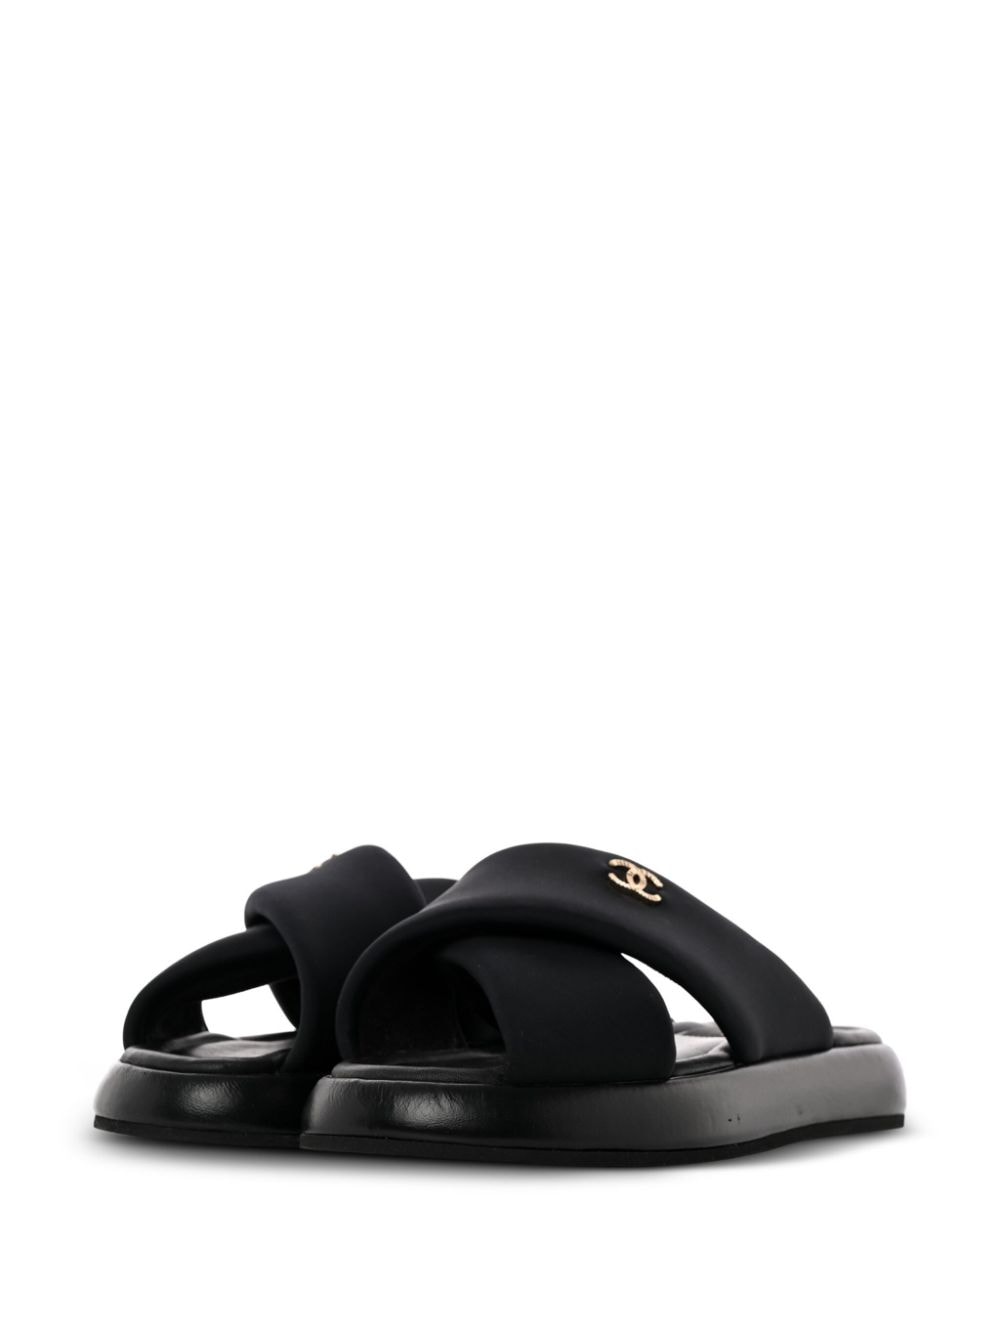 Pre-owned Chanel Cc Criss-cross Pool Slides In Black